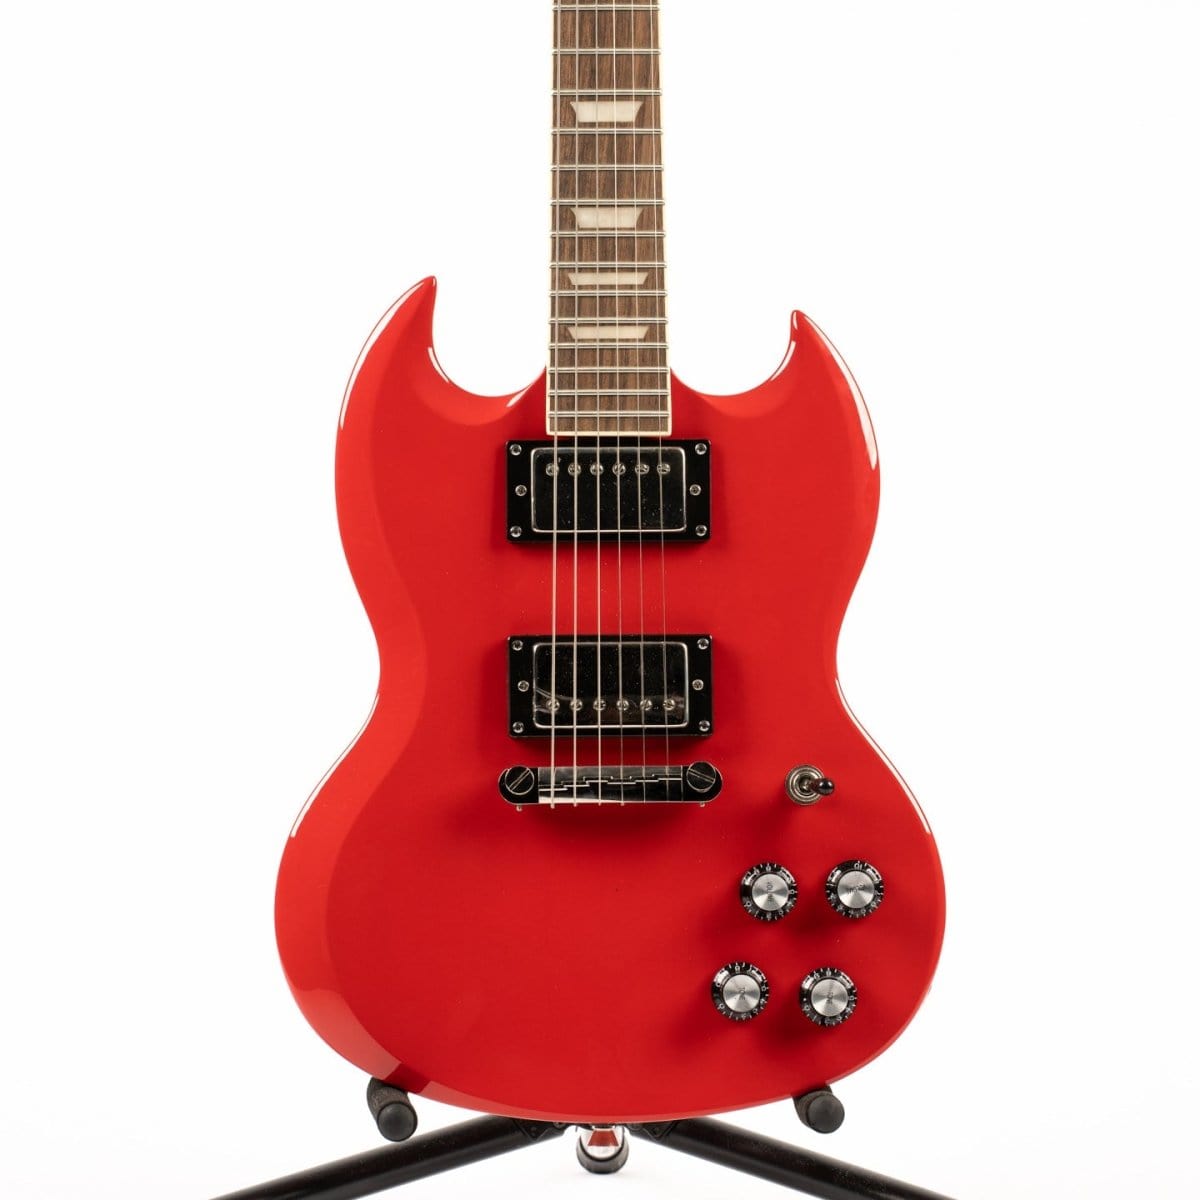 Epiphone - Power Players Sg - Electric Guitar - Lava Red